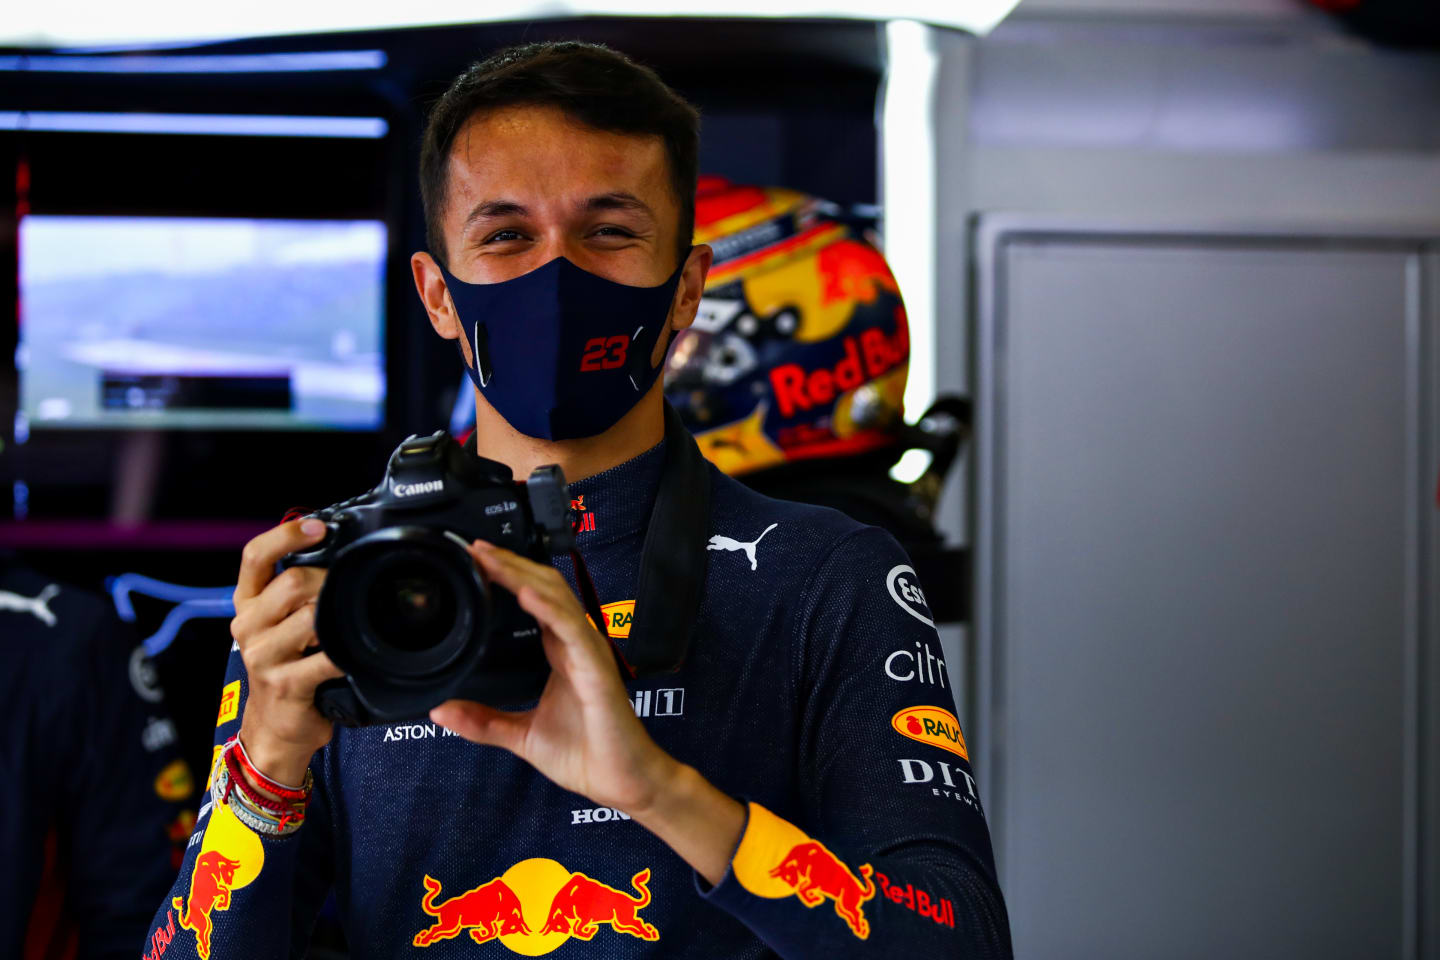 NUERBURG, GERMANY - OCTOBER 09: Alexander Albon of Thailand and Red Bull Racing takes a photo in